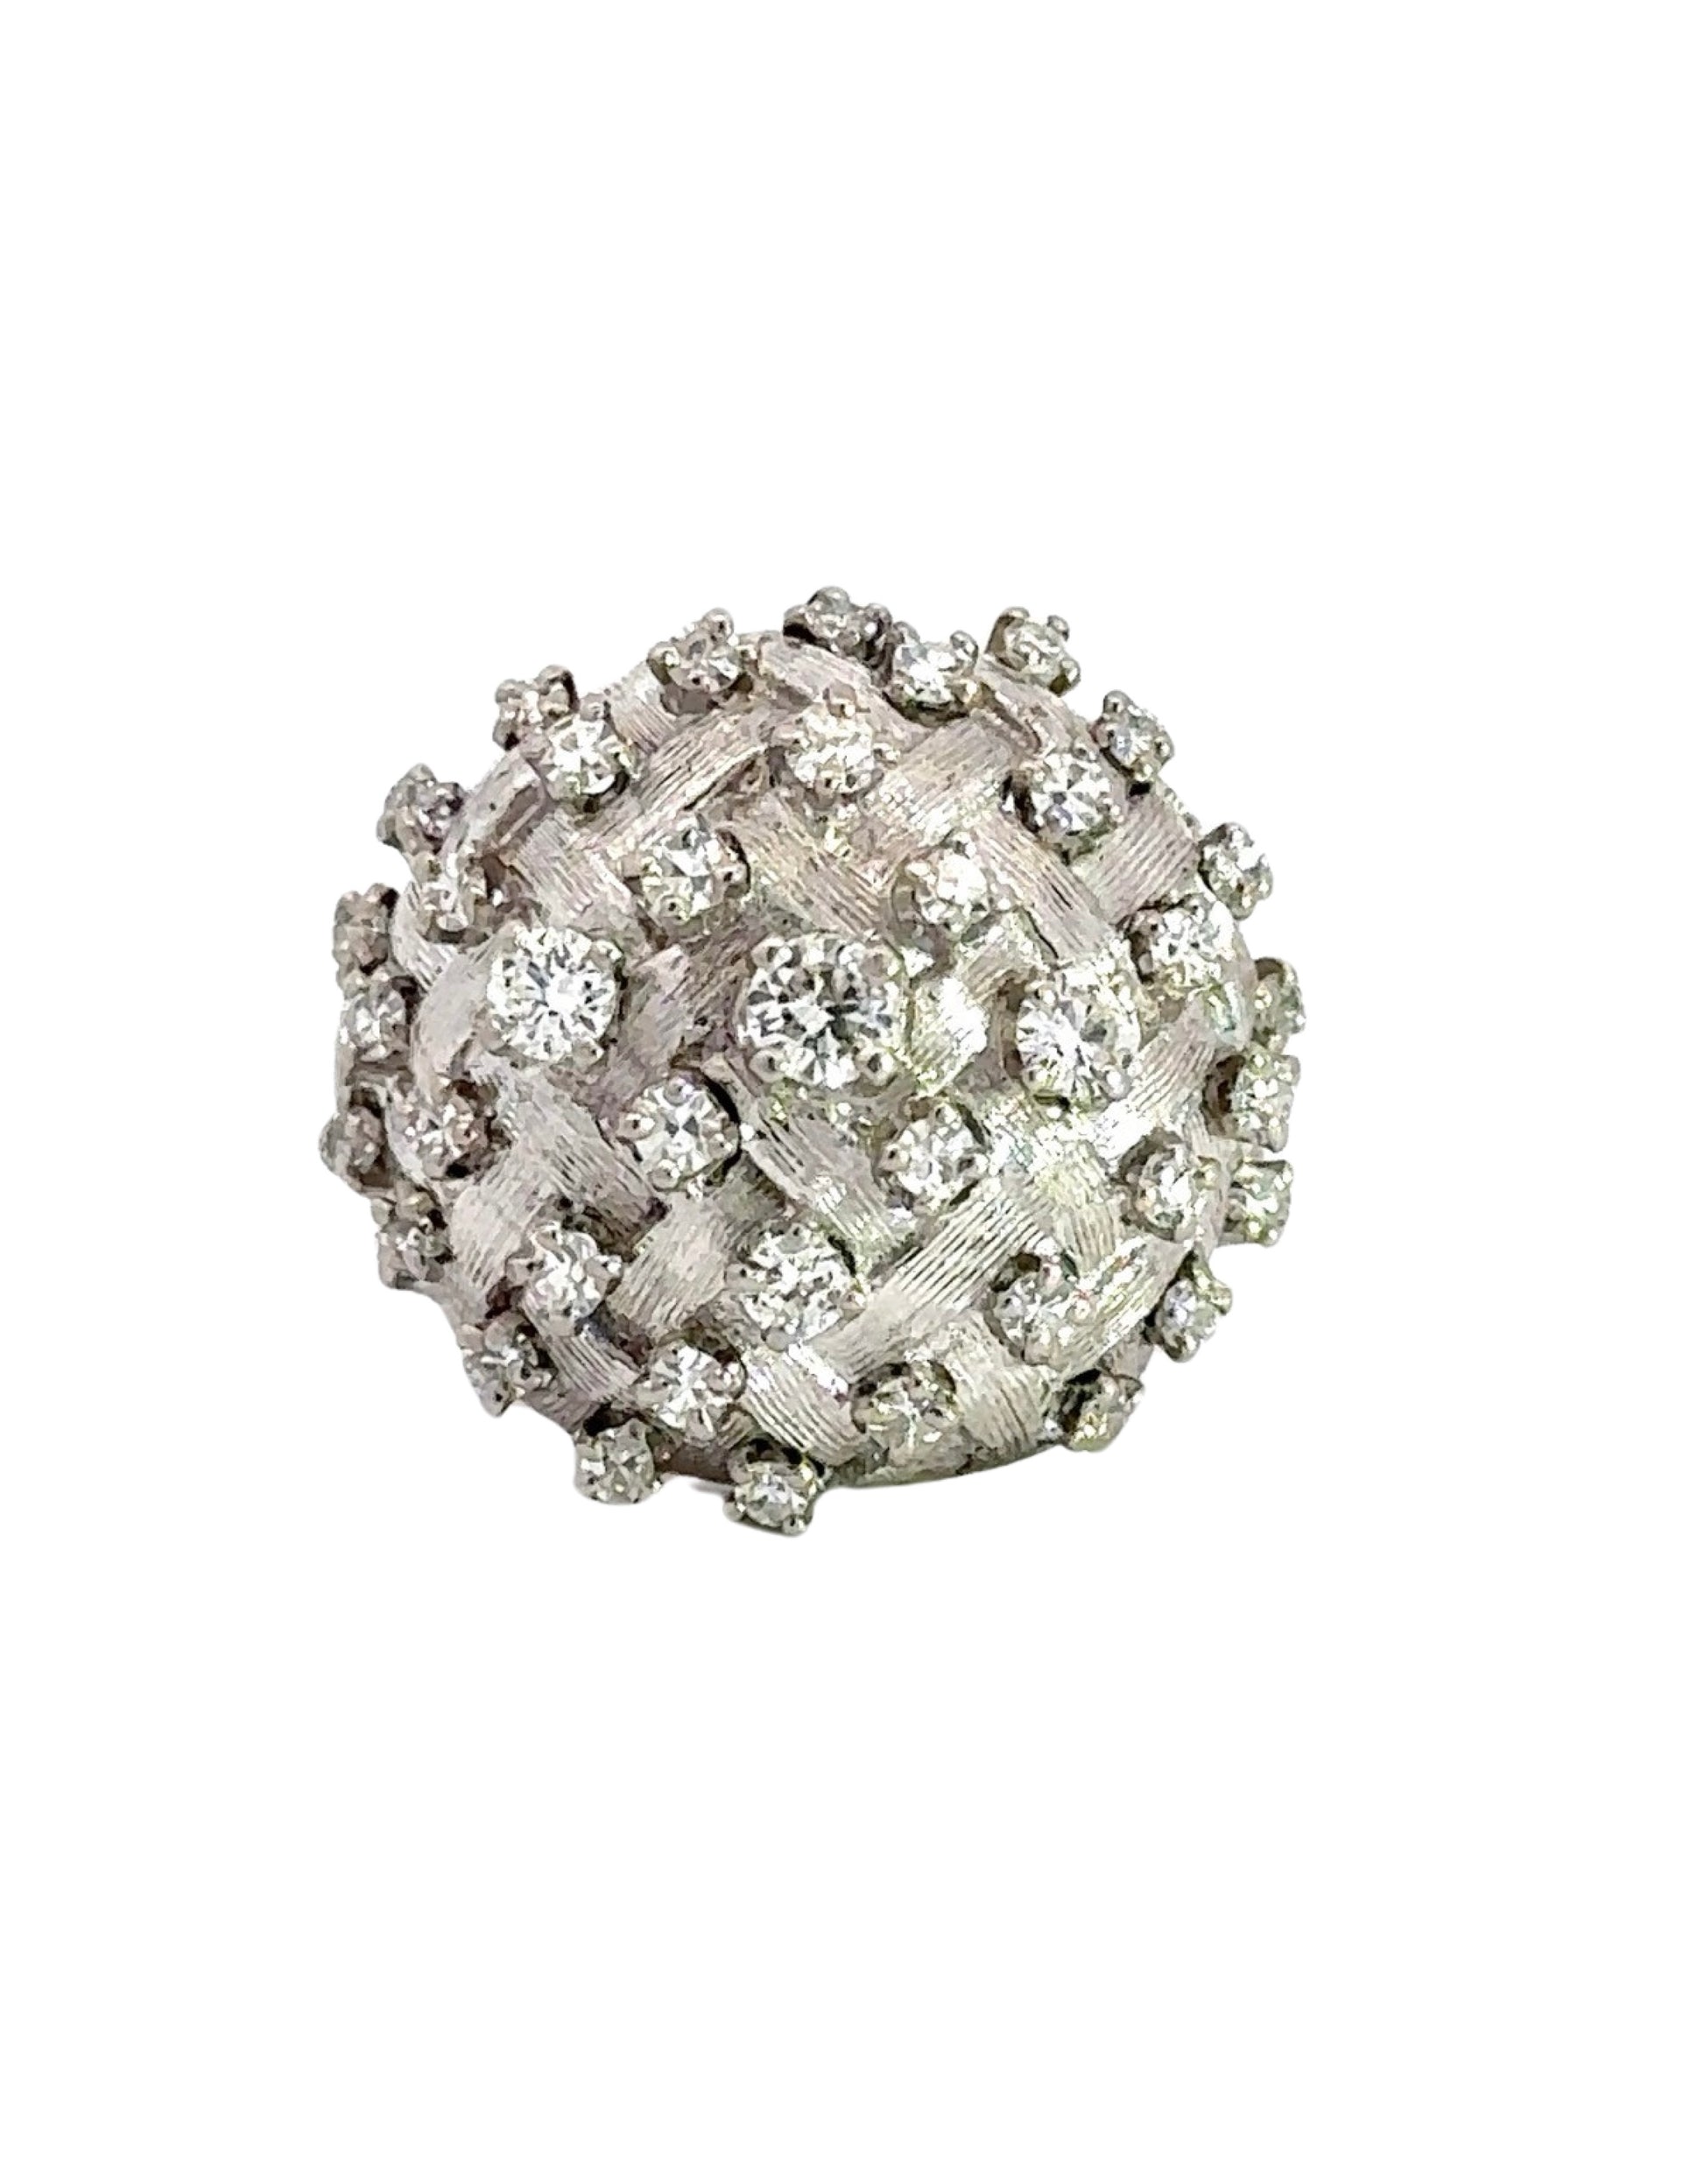 White gold diamond dome-shaped ring with different size round diamonds scattered on the dome